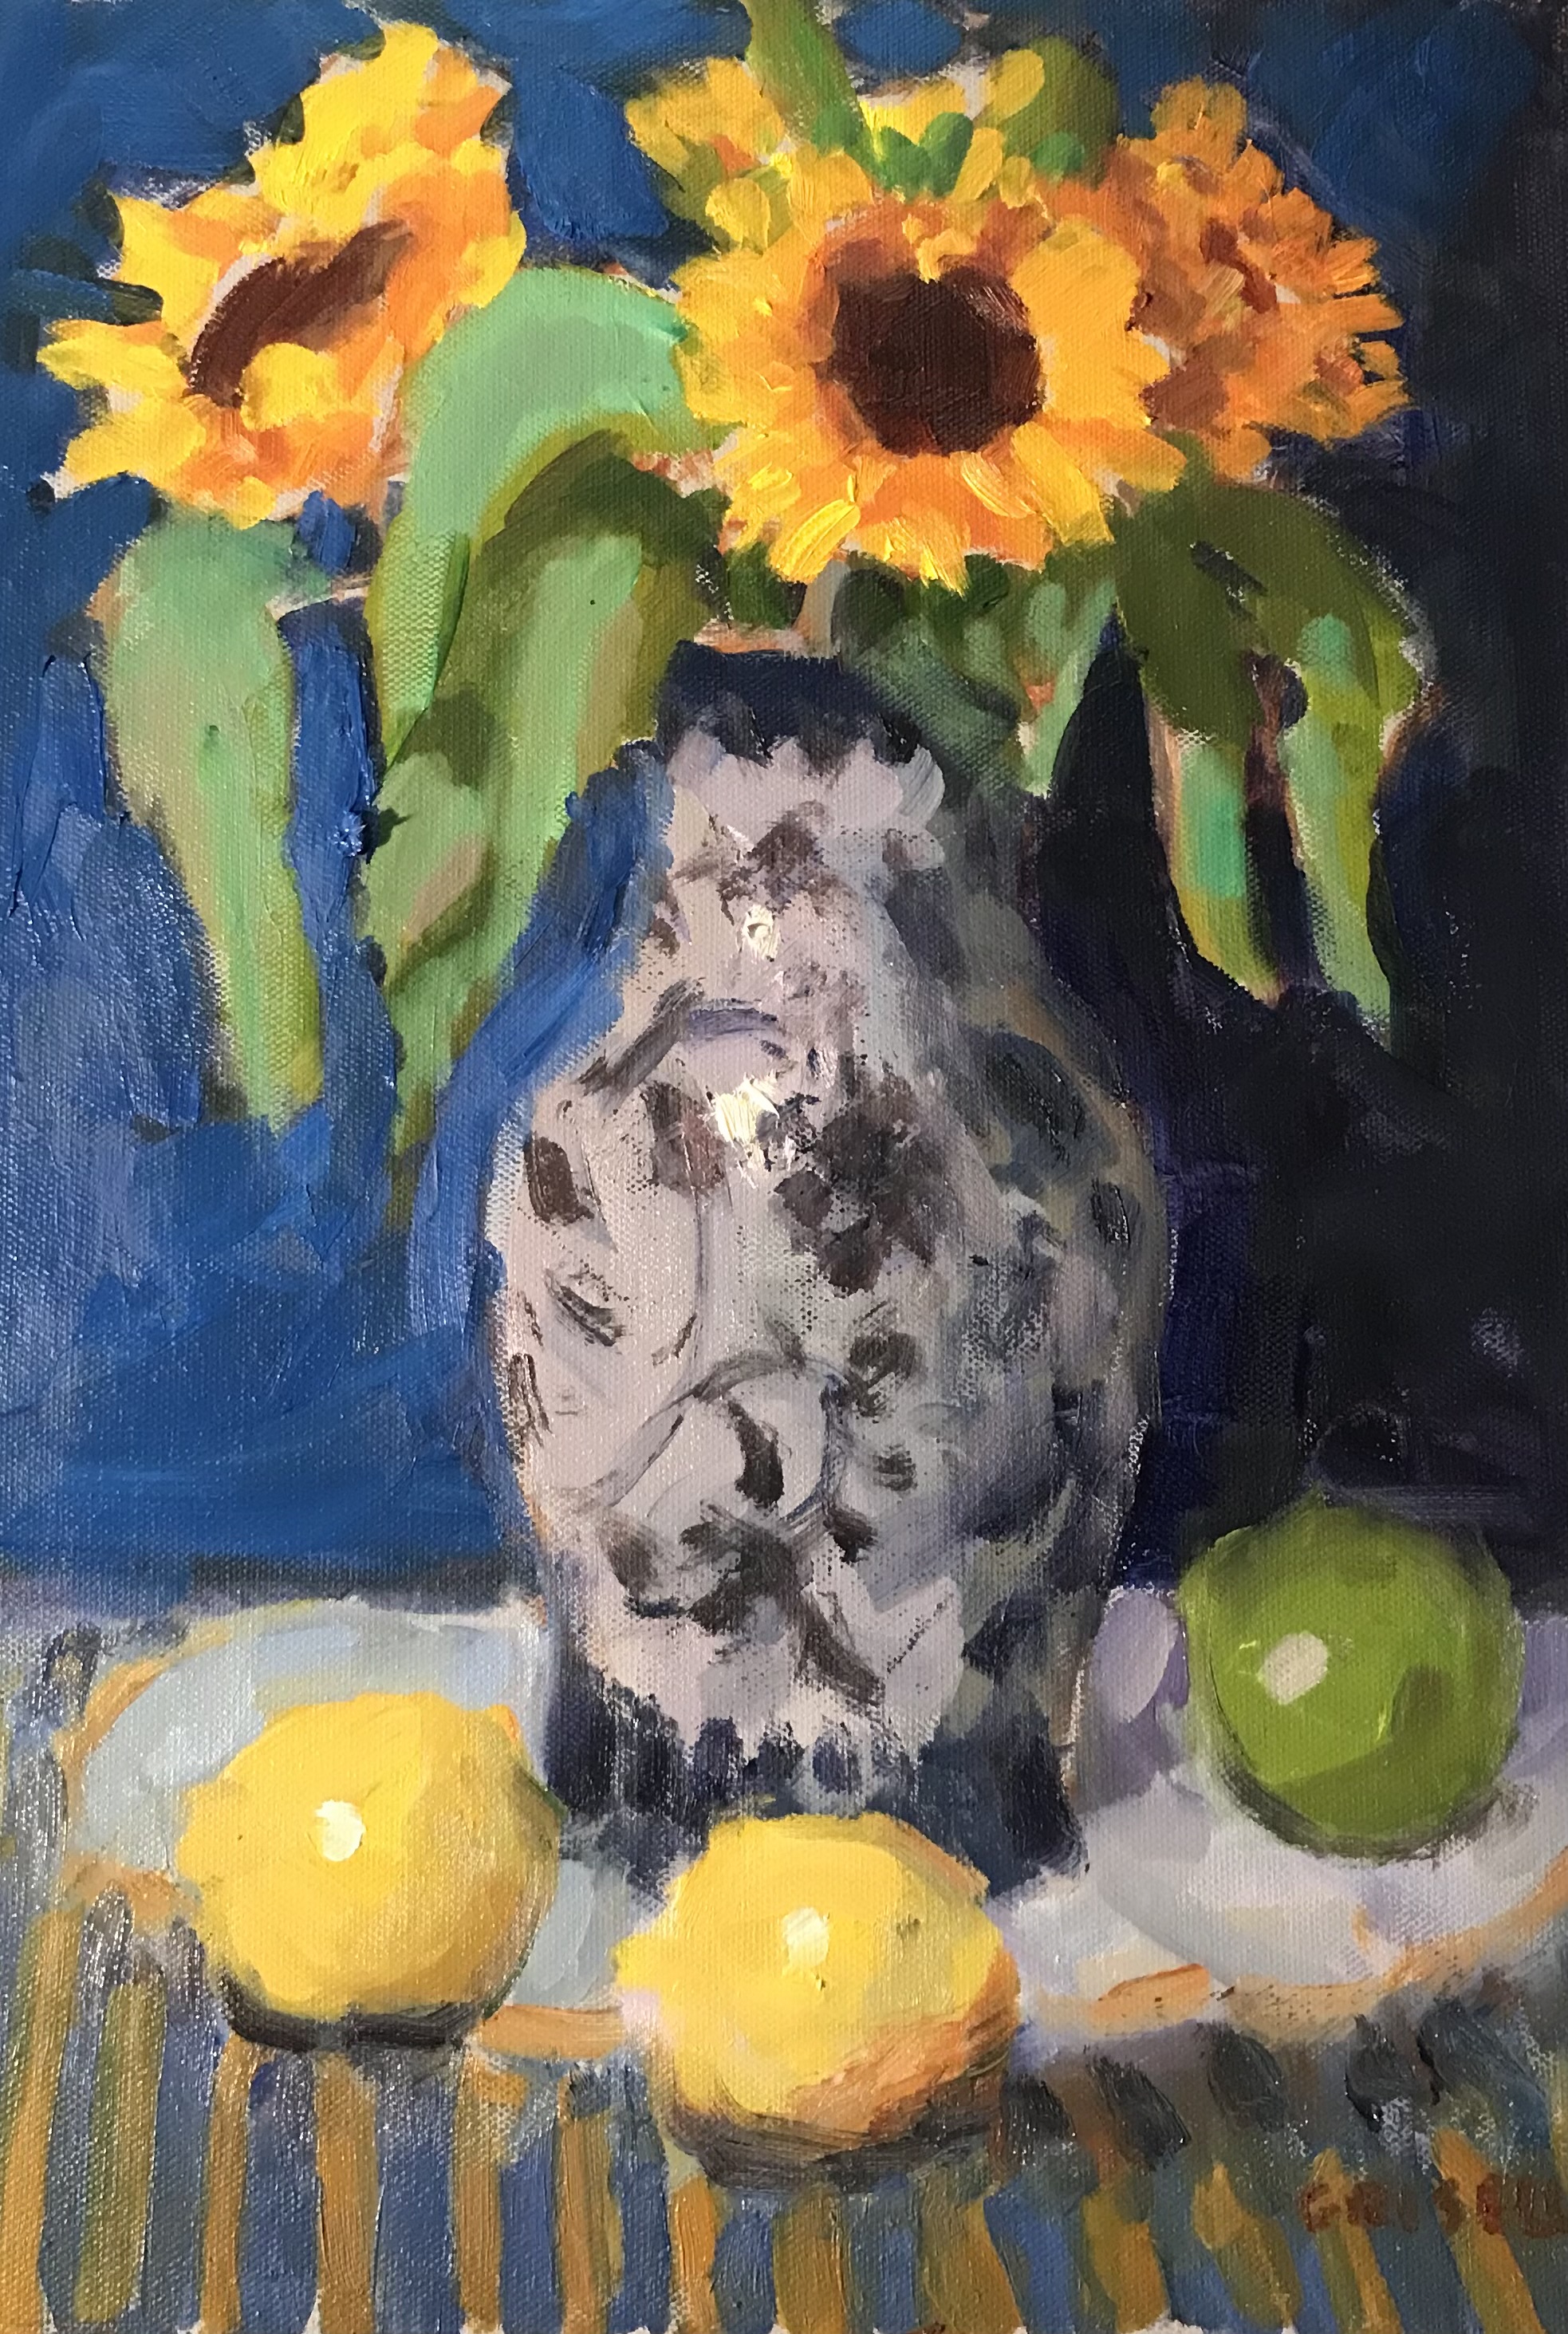 Painting of Sunflowers